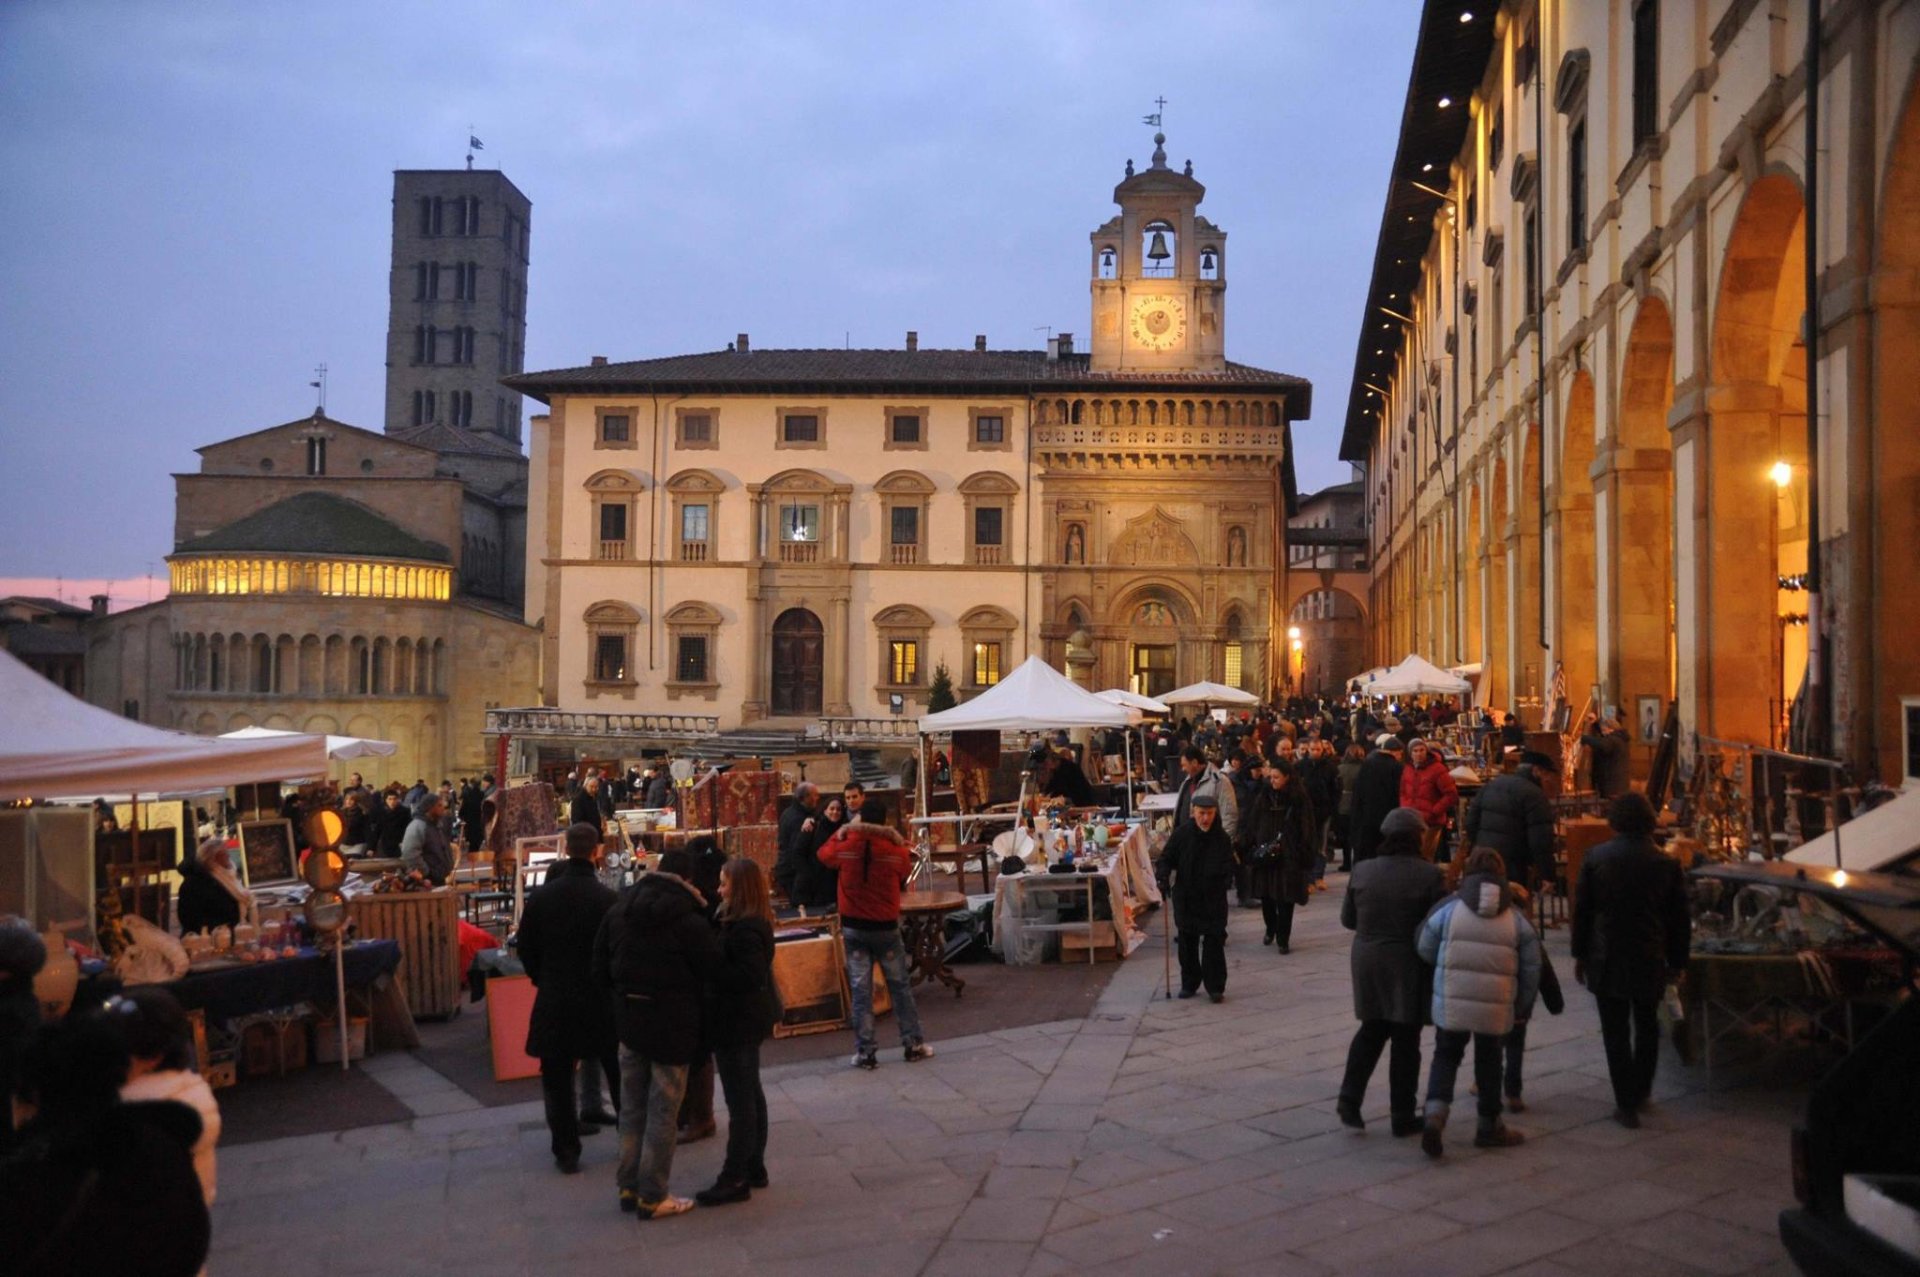 Antiques market by the Palazzo Comunale in Arezzo, Italy